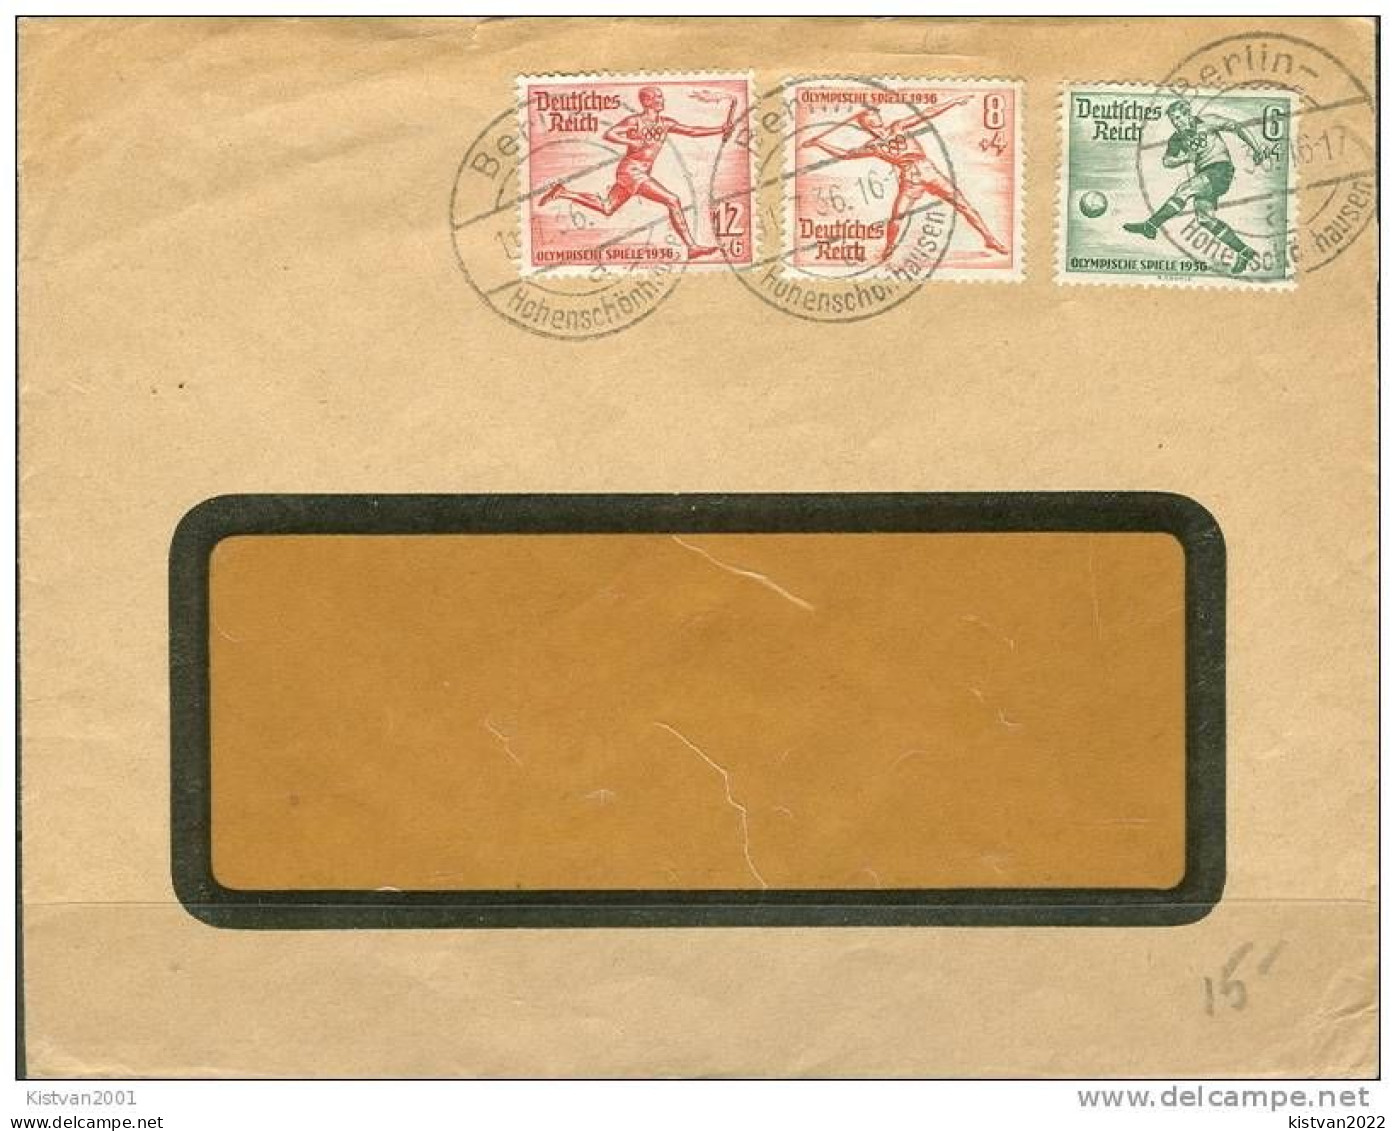 Postal History Cover: Germany Cover - Summer 1936: Berlin